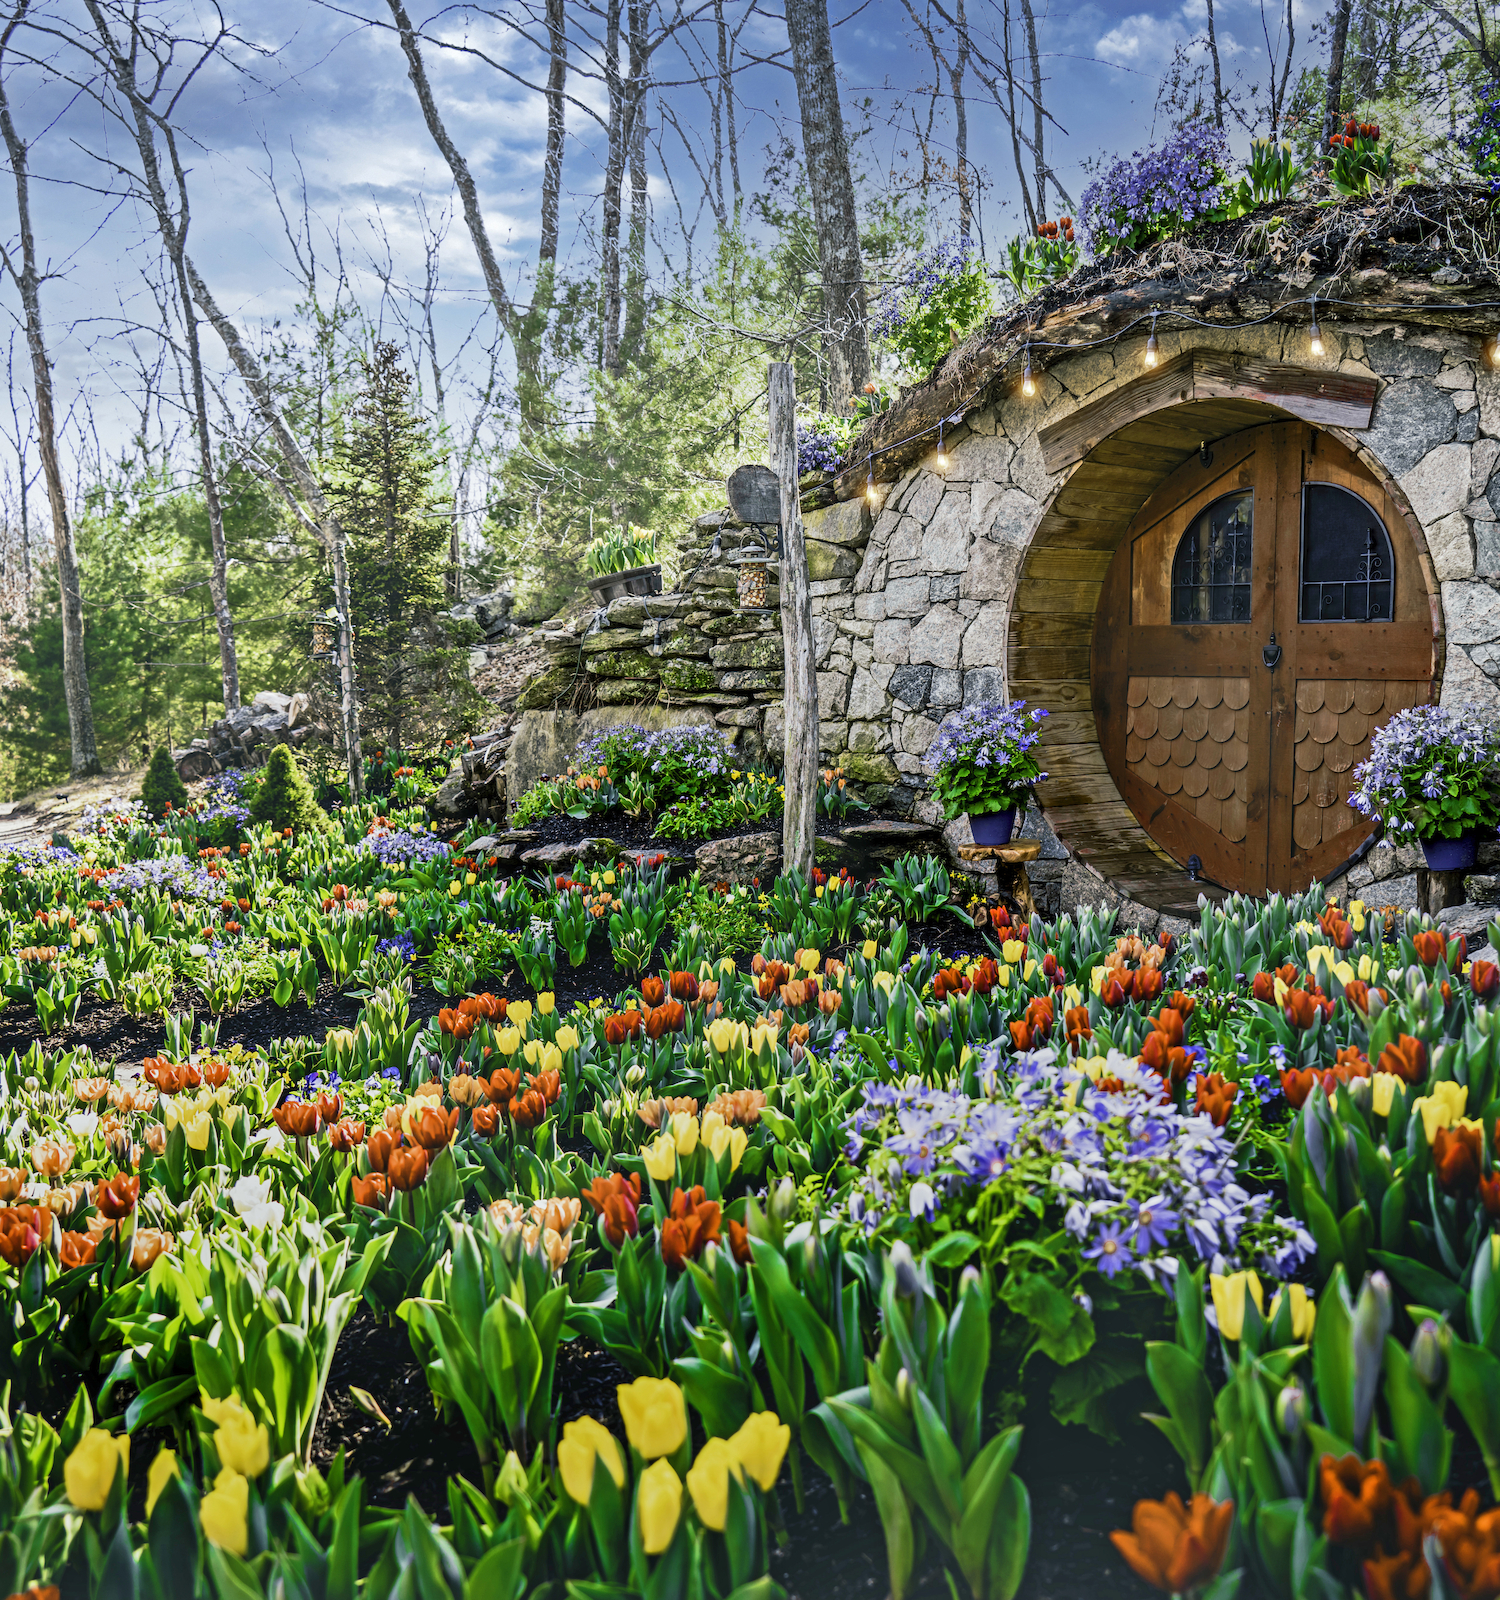 Capture the essence of spring at The Preserve's Hobbit House Photo Experience™, with a colorful carpet of tulips leading to the charming stone doorway.